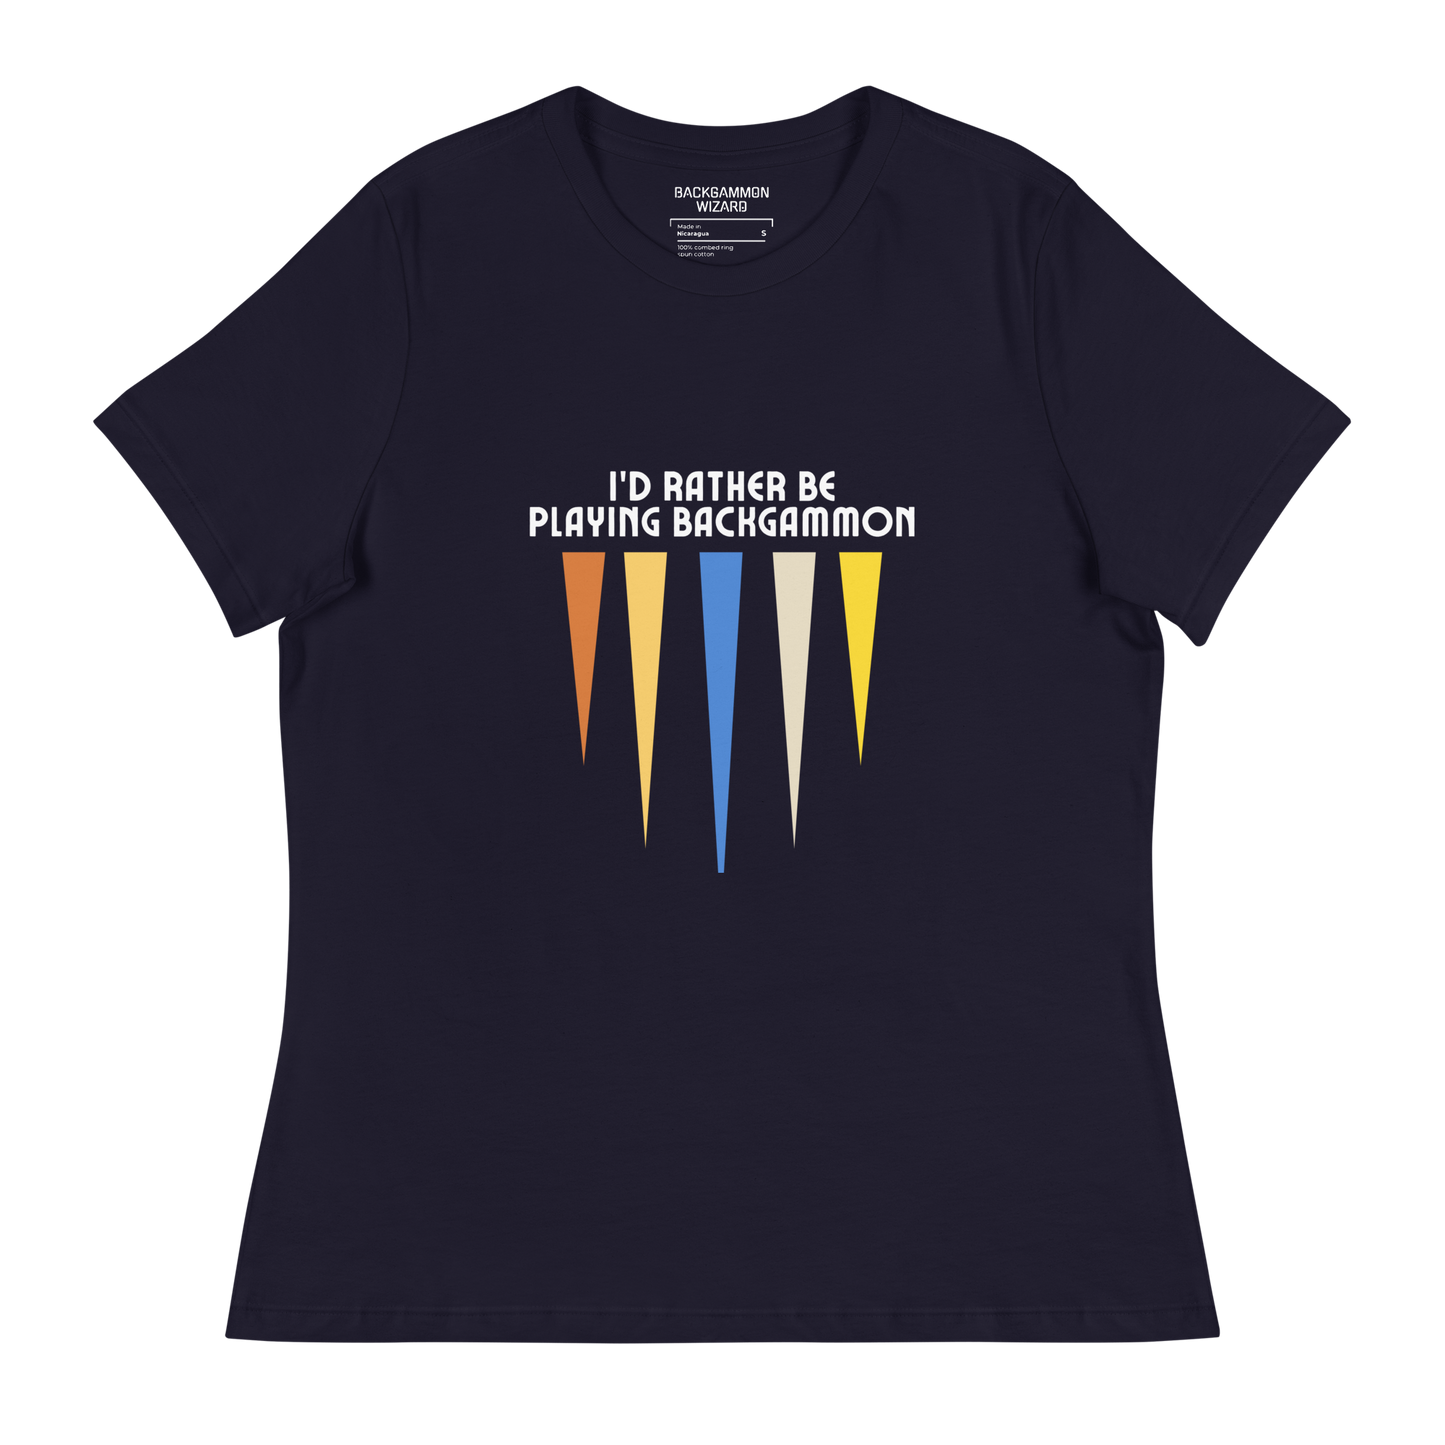 'I'D RATHER BE PLAYING BACKGAMMON' Women's Shirt